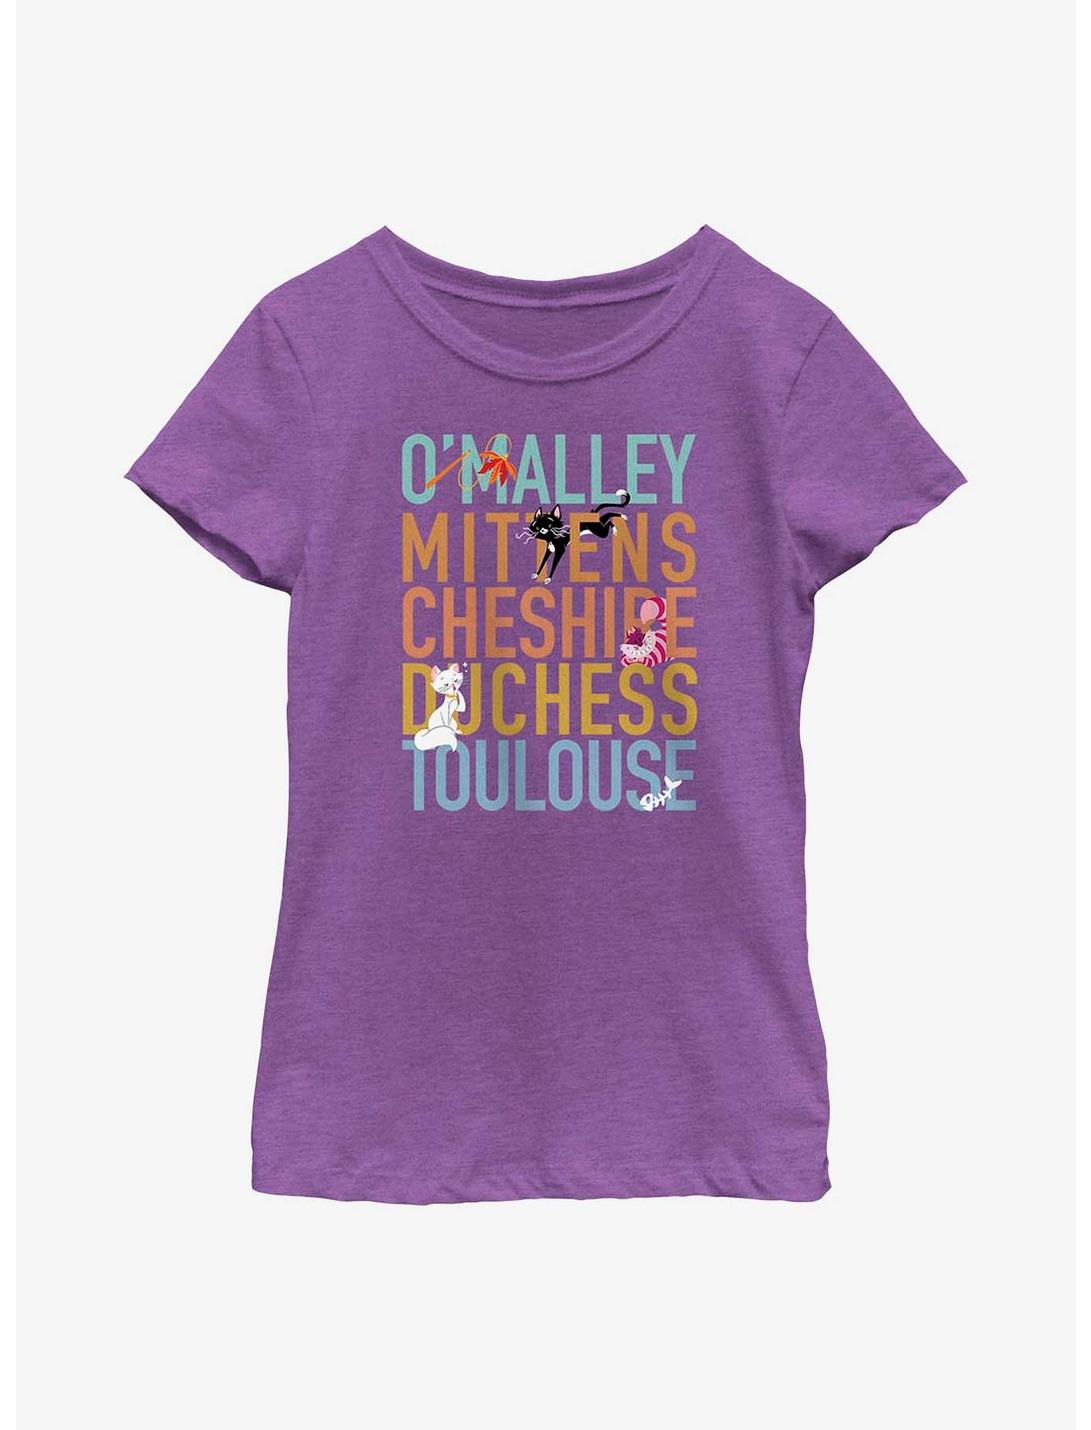 Disney Channel O'Malley, Mittens, Cheshire, Duchess, Toulouse Youth Girls T-Shirt, PURPLE BERRY, hi-res